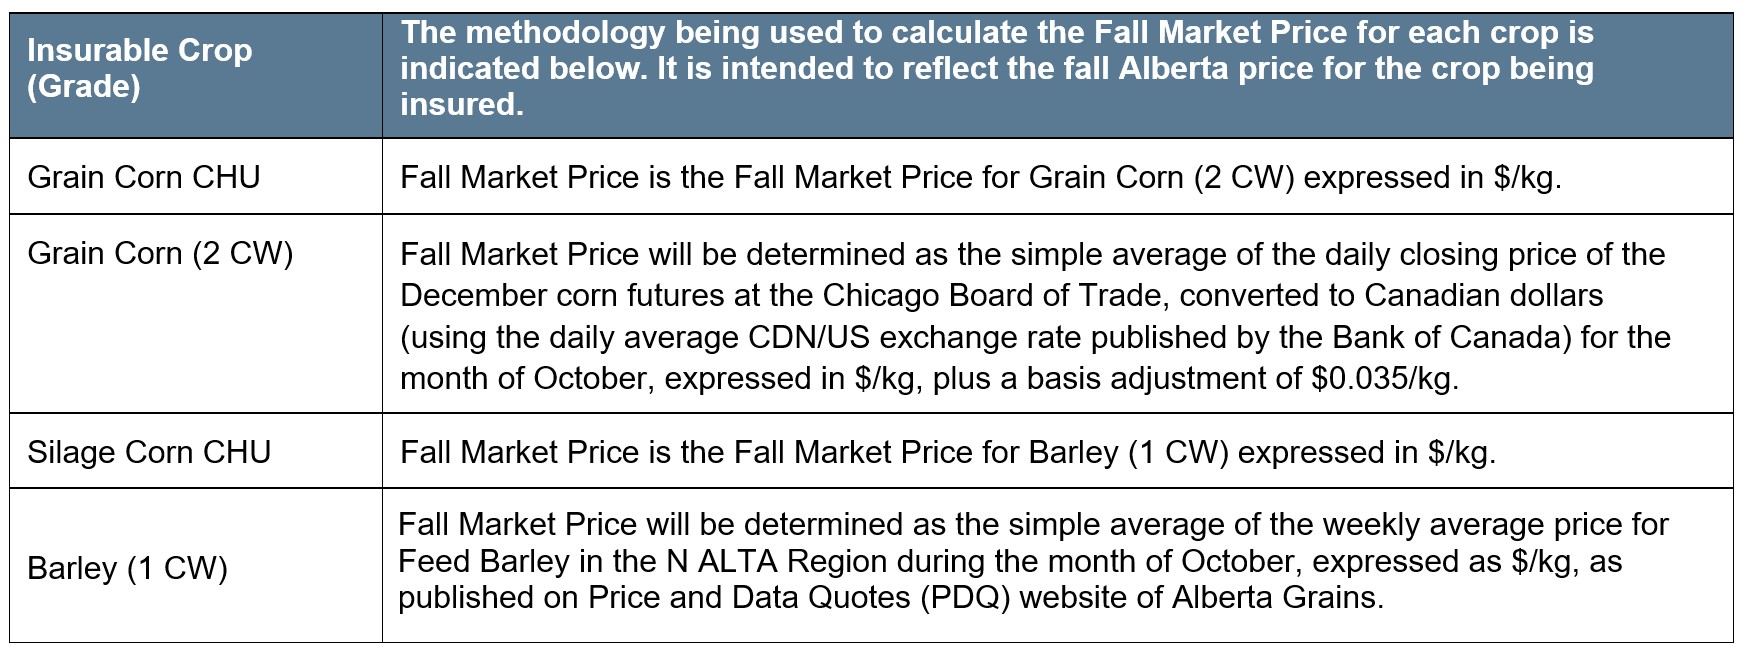 Corn Heat Units Article 2 Pricing. Call AFSC details 